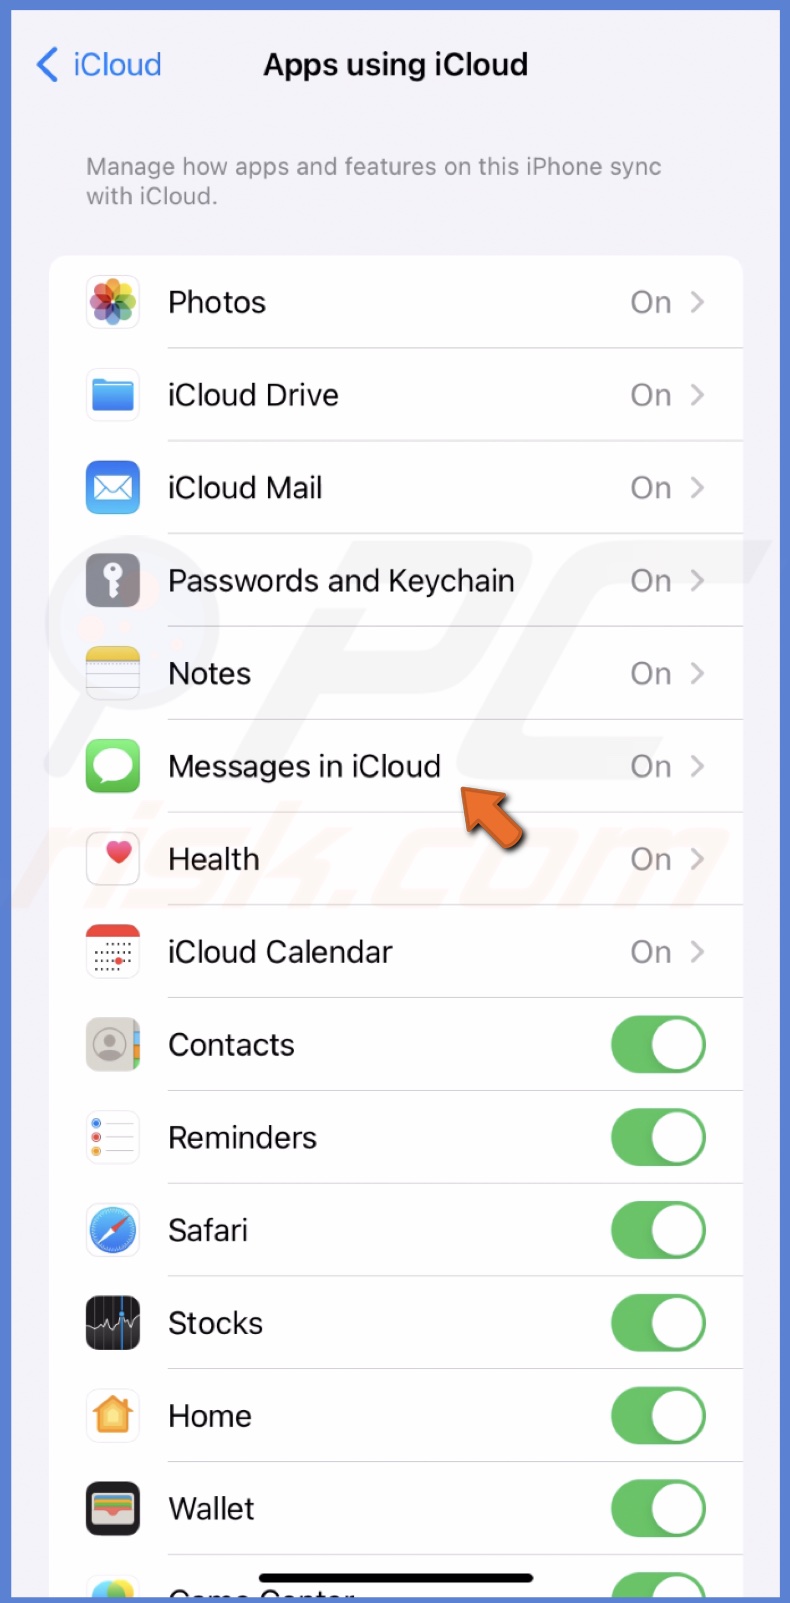 Tap Messages in iCloud